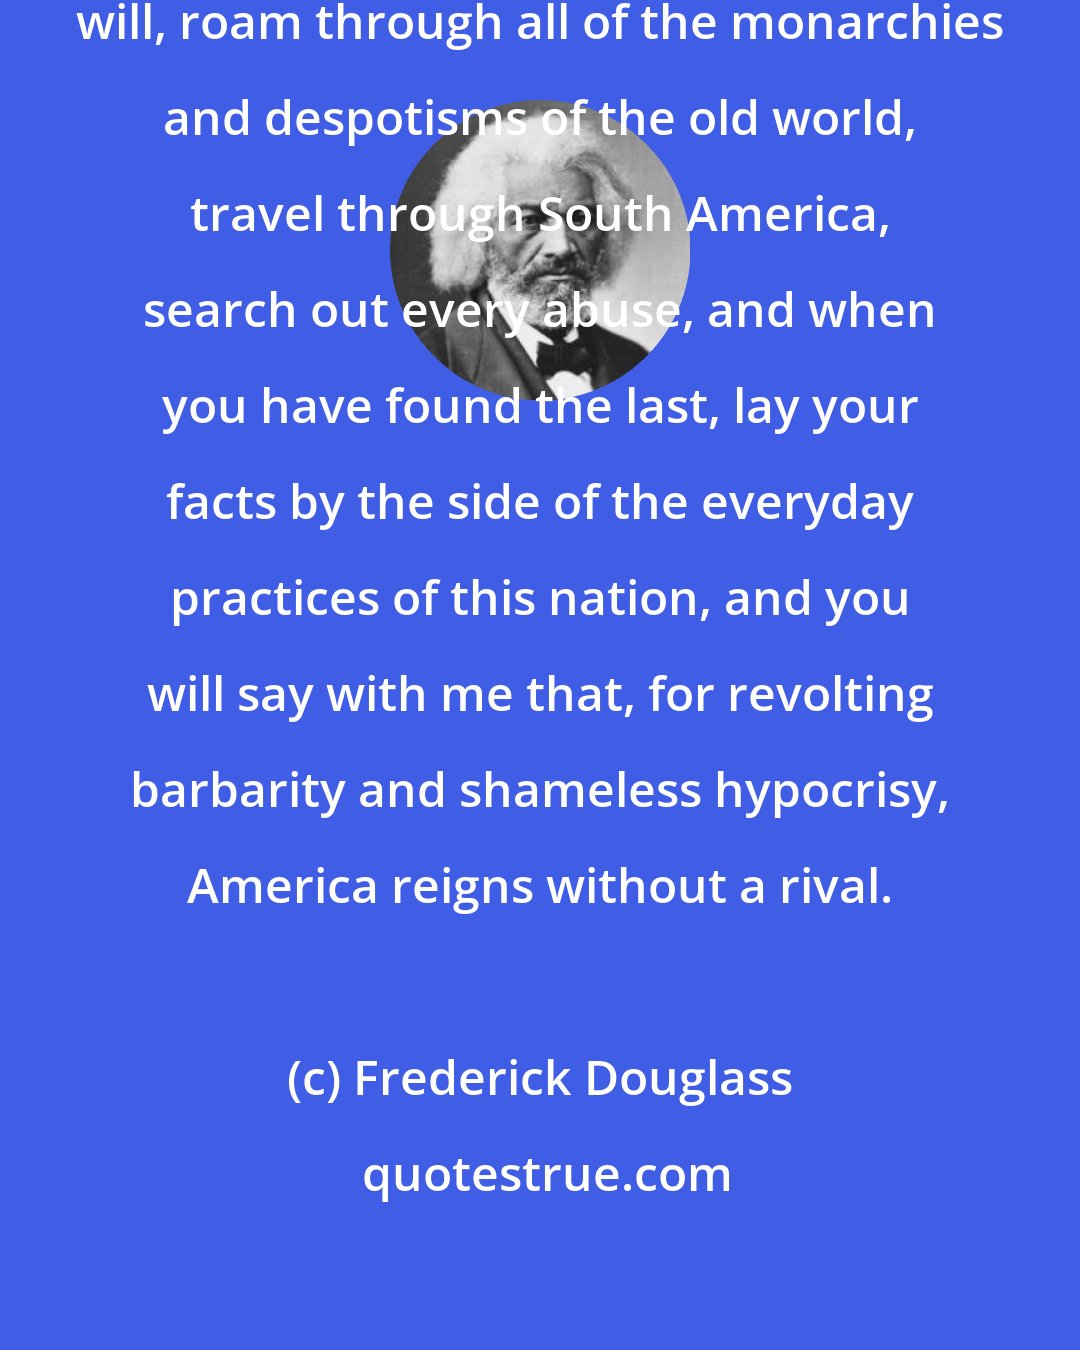 Frederick Douglass: Go where you may, search where you will, roam through all of the monarchies and despotisms of the old world, travel through South America, search out every abuse, and when you have found the last, lay your facts by the side of the everyday practices of this nation, and you will say with me that, for revolting barbarity and shameless hypocrisy, America reigns without a rival.